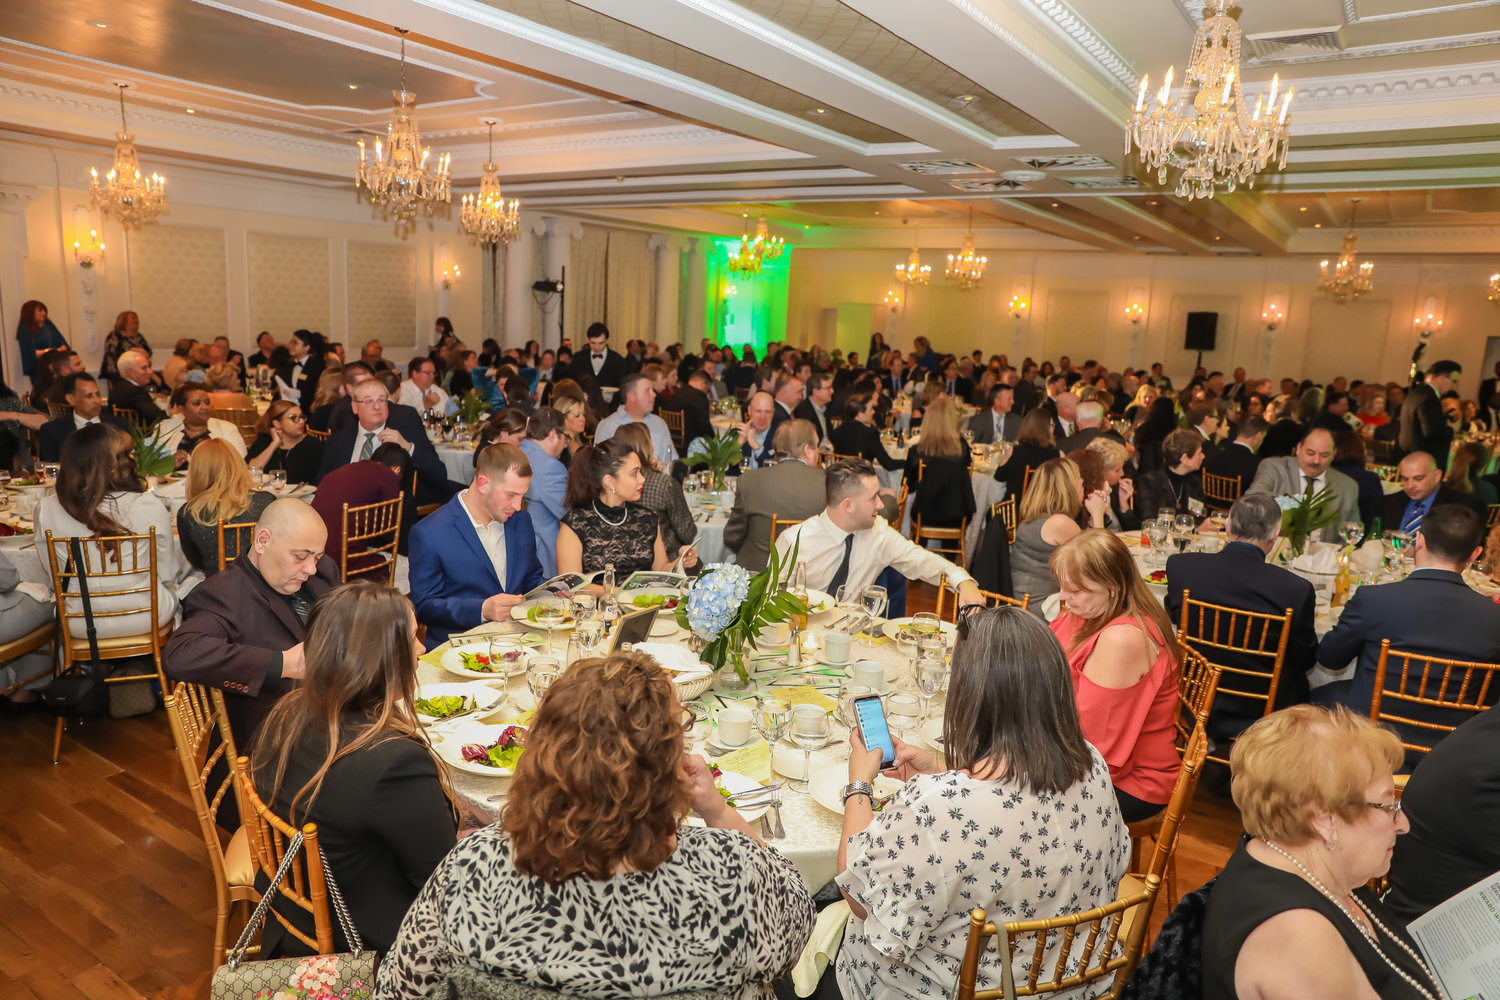 Over 40 family business owners and their families filled the dining room to support their colleagues who won awards.